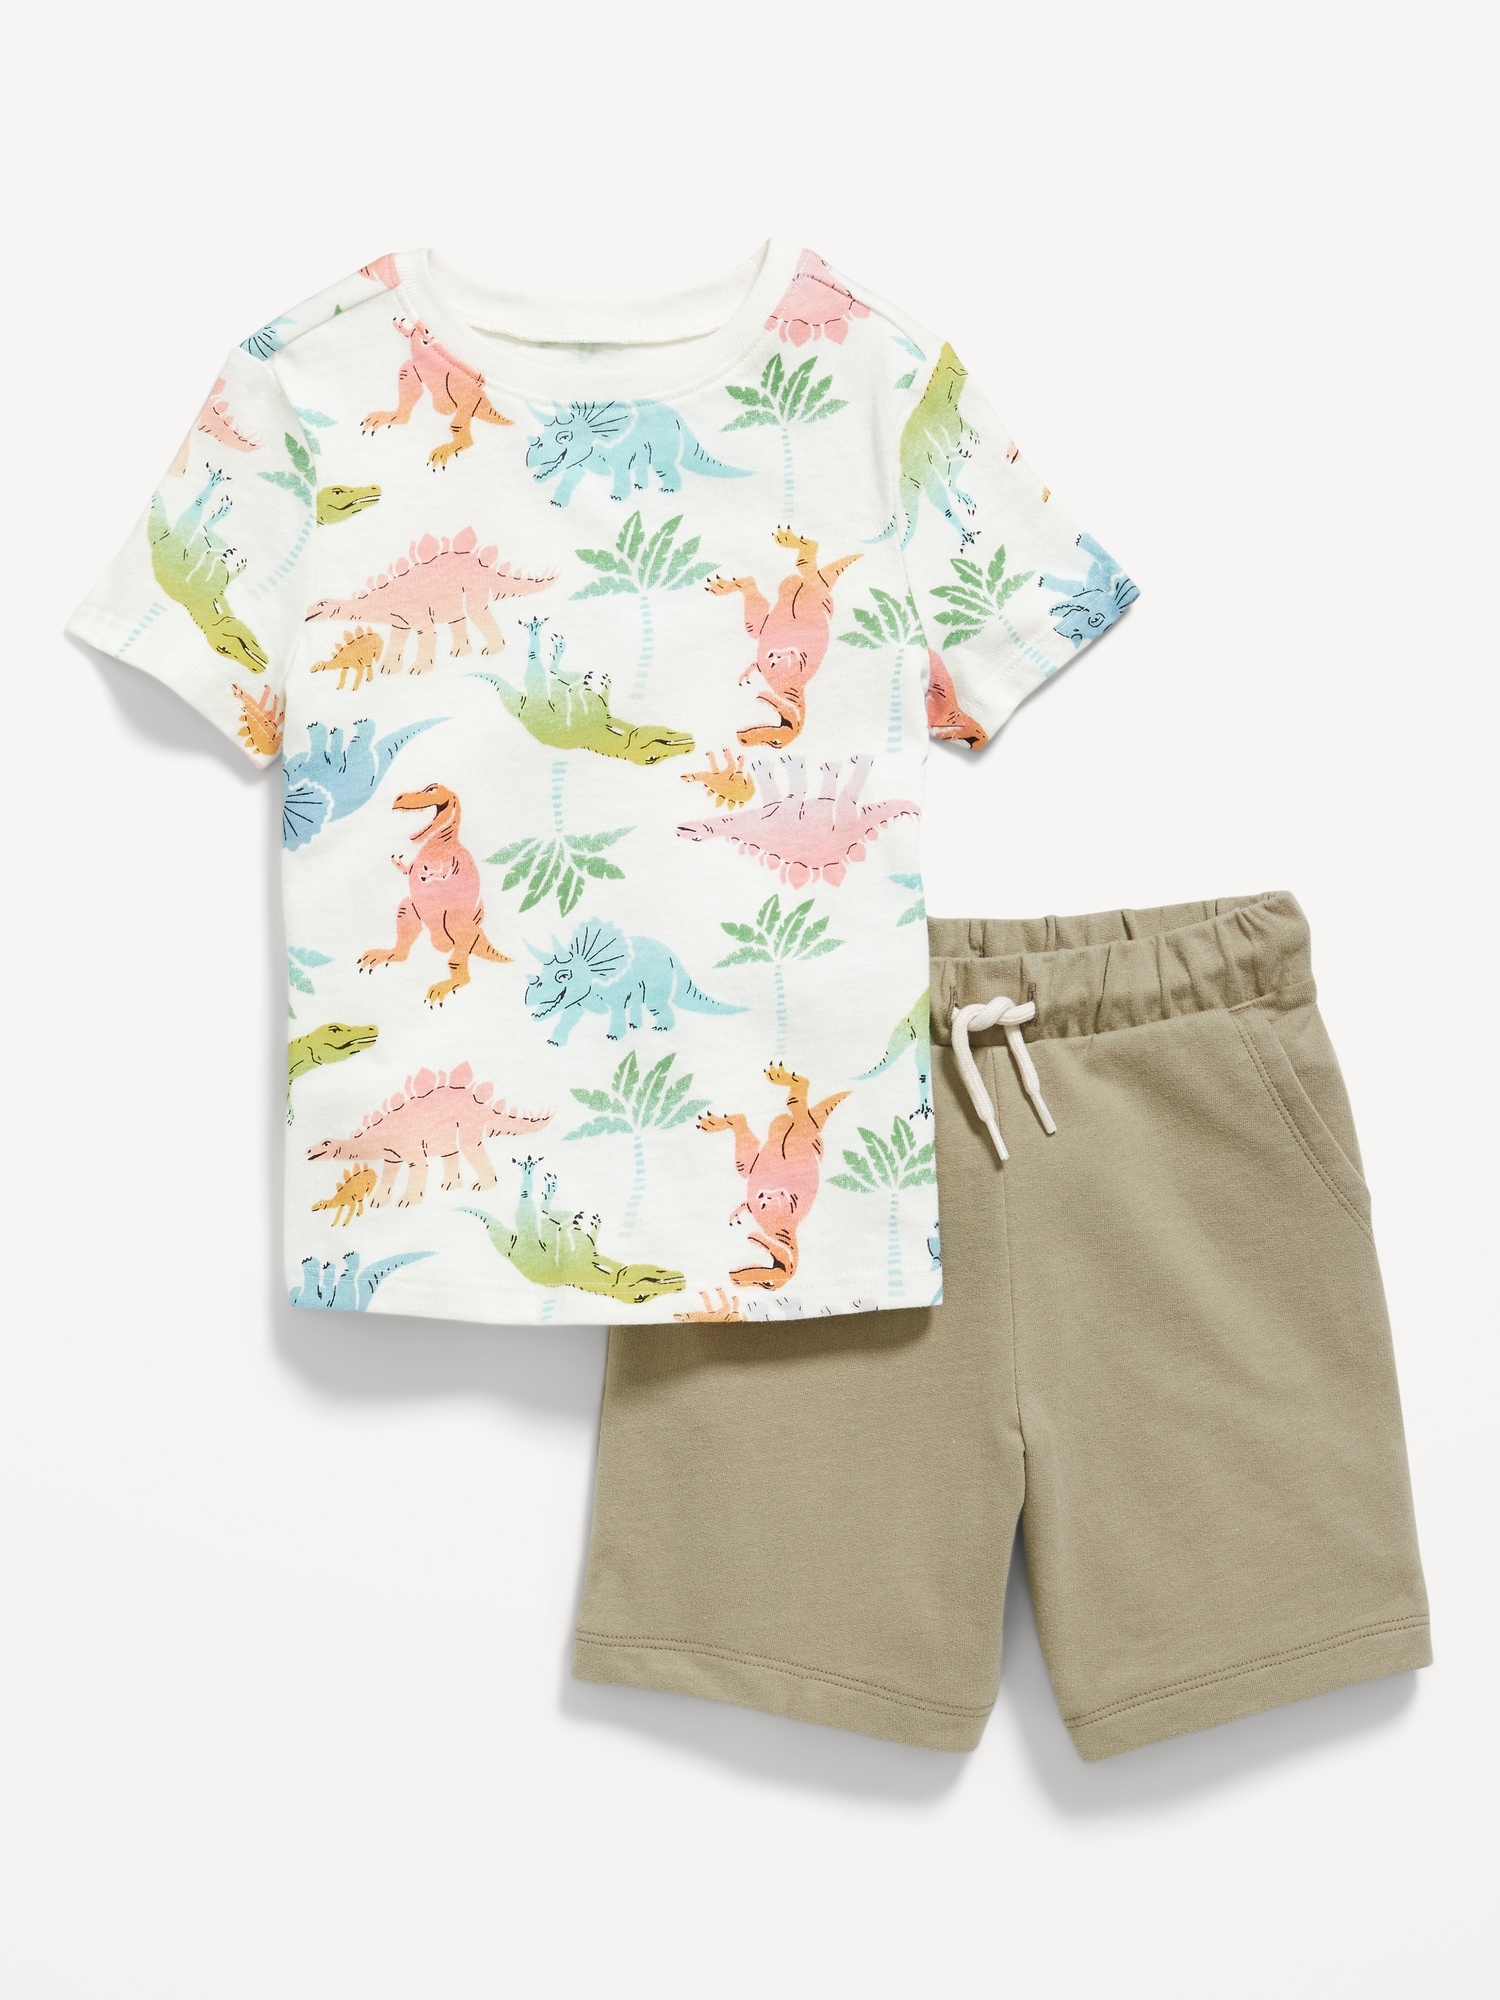 T-Shirt and Pull-On Shorts Set for Toddler Boys Hot Deal